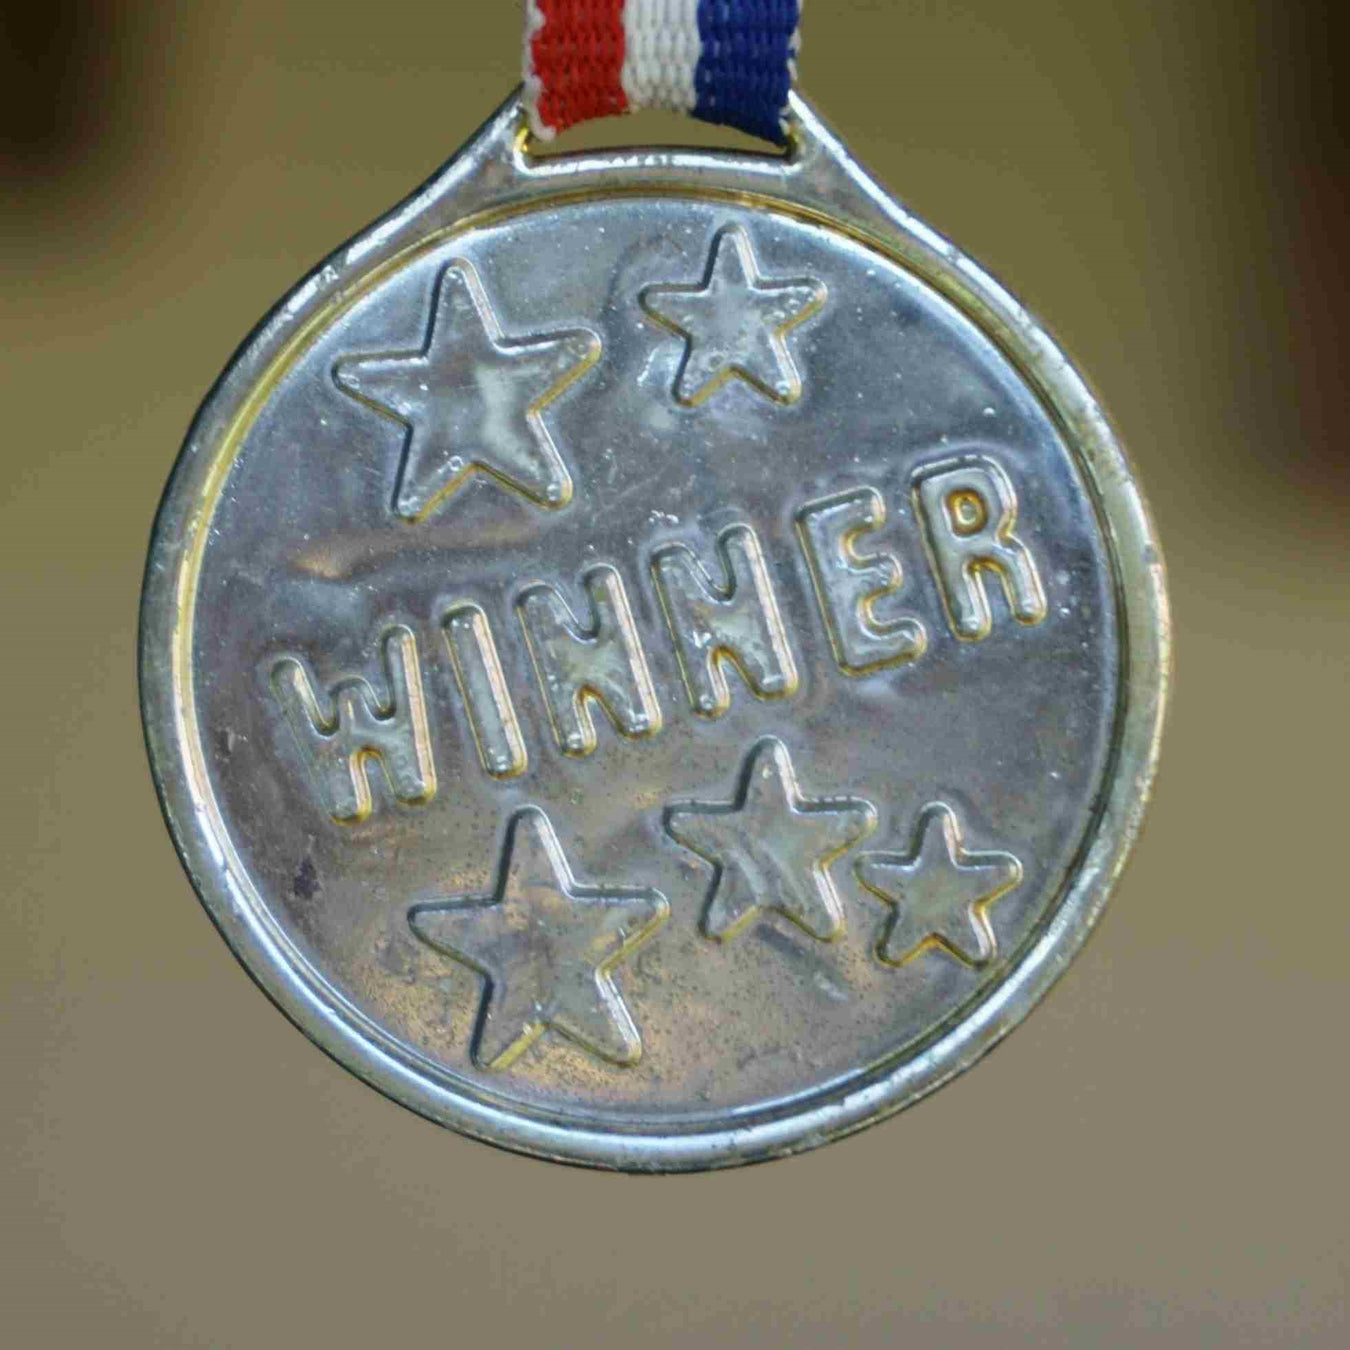 Close up of Medal embossed inscribed "winner" and five starts on the end of a striped lanyard